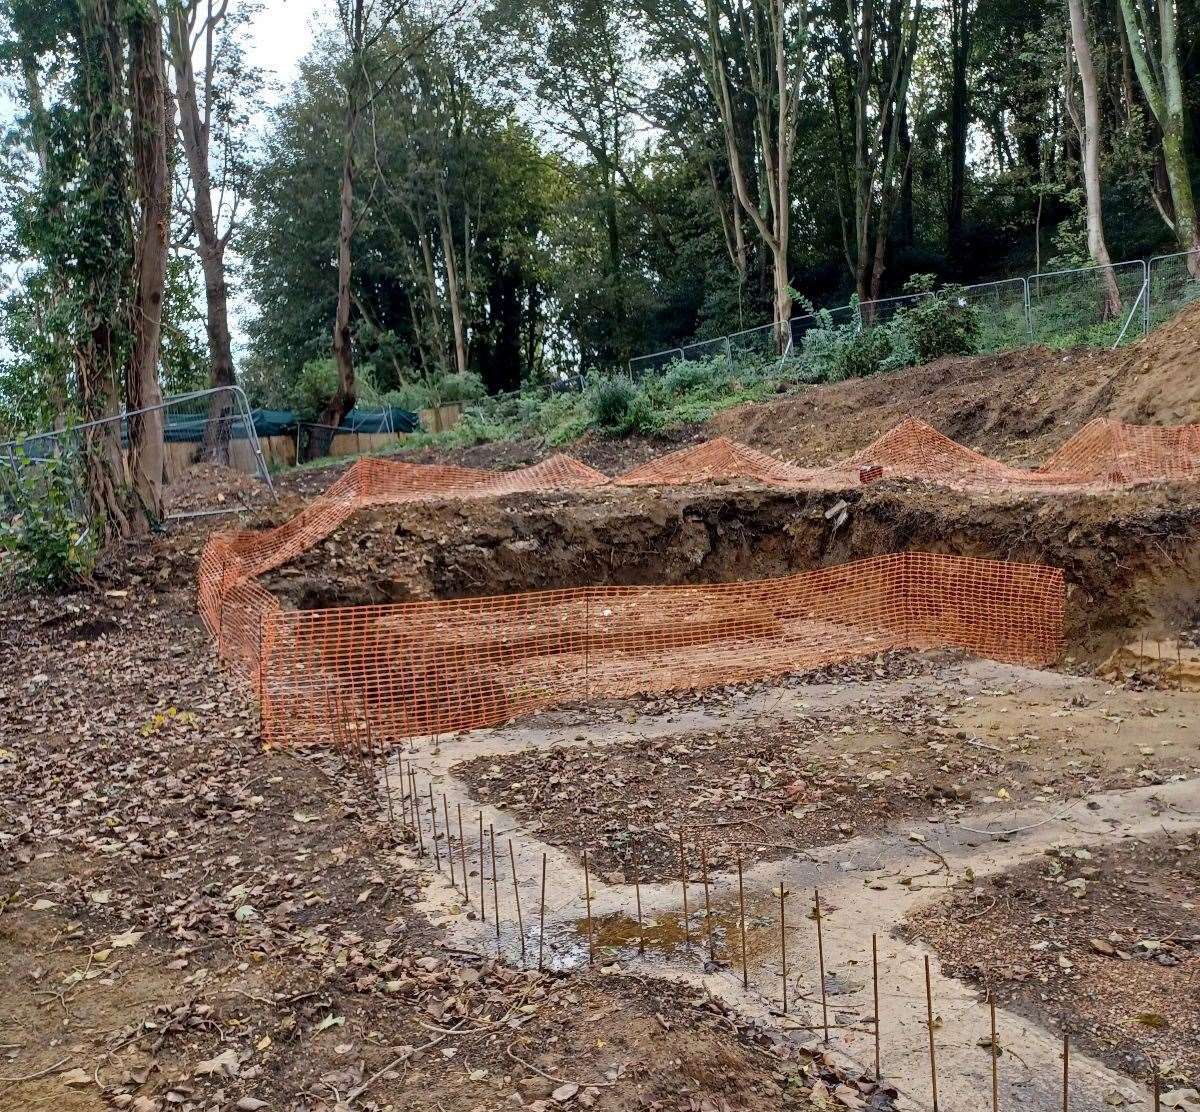 Two brick tanks possibly dating back to the 20th century were discovered